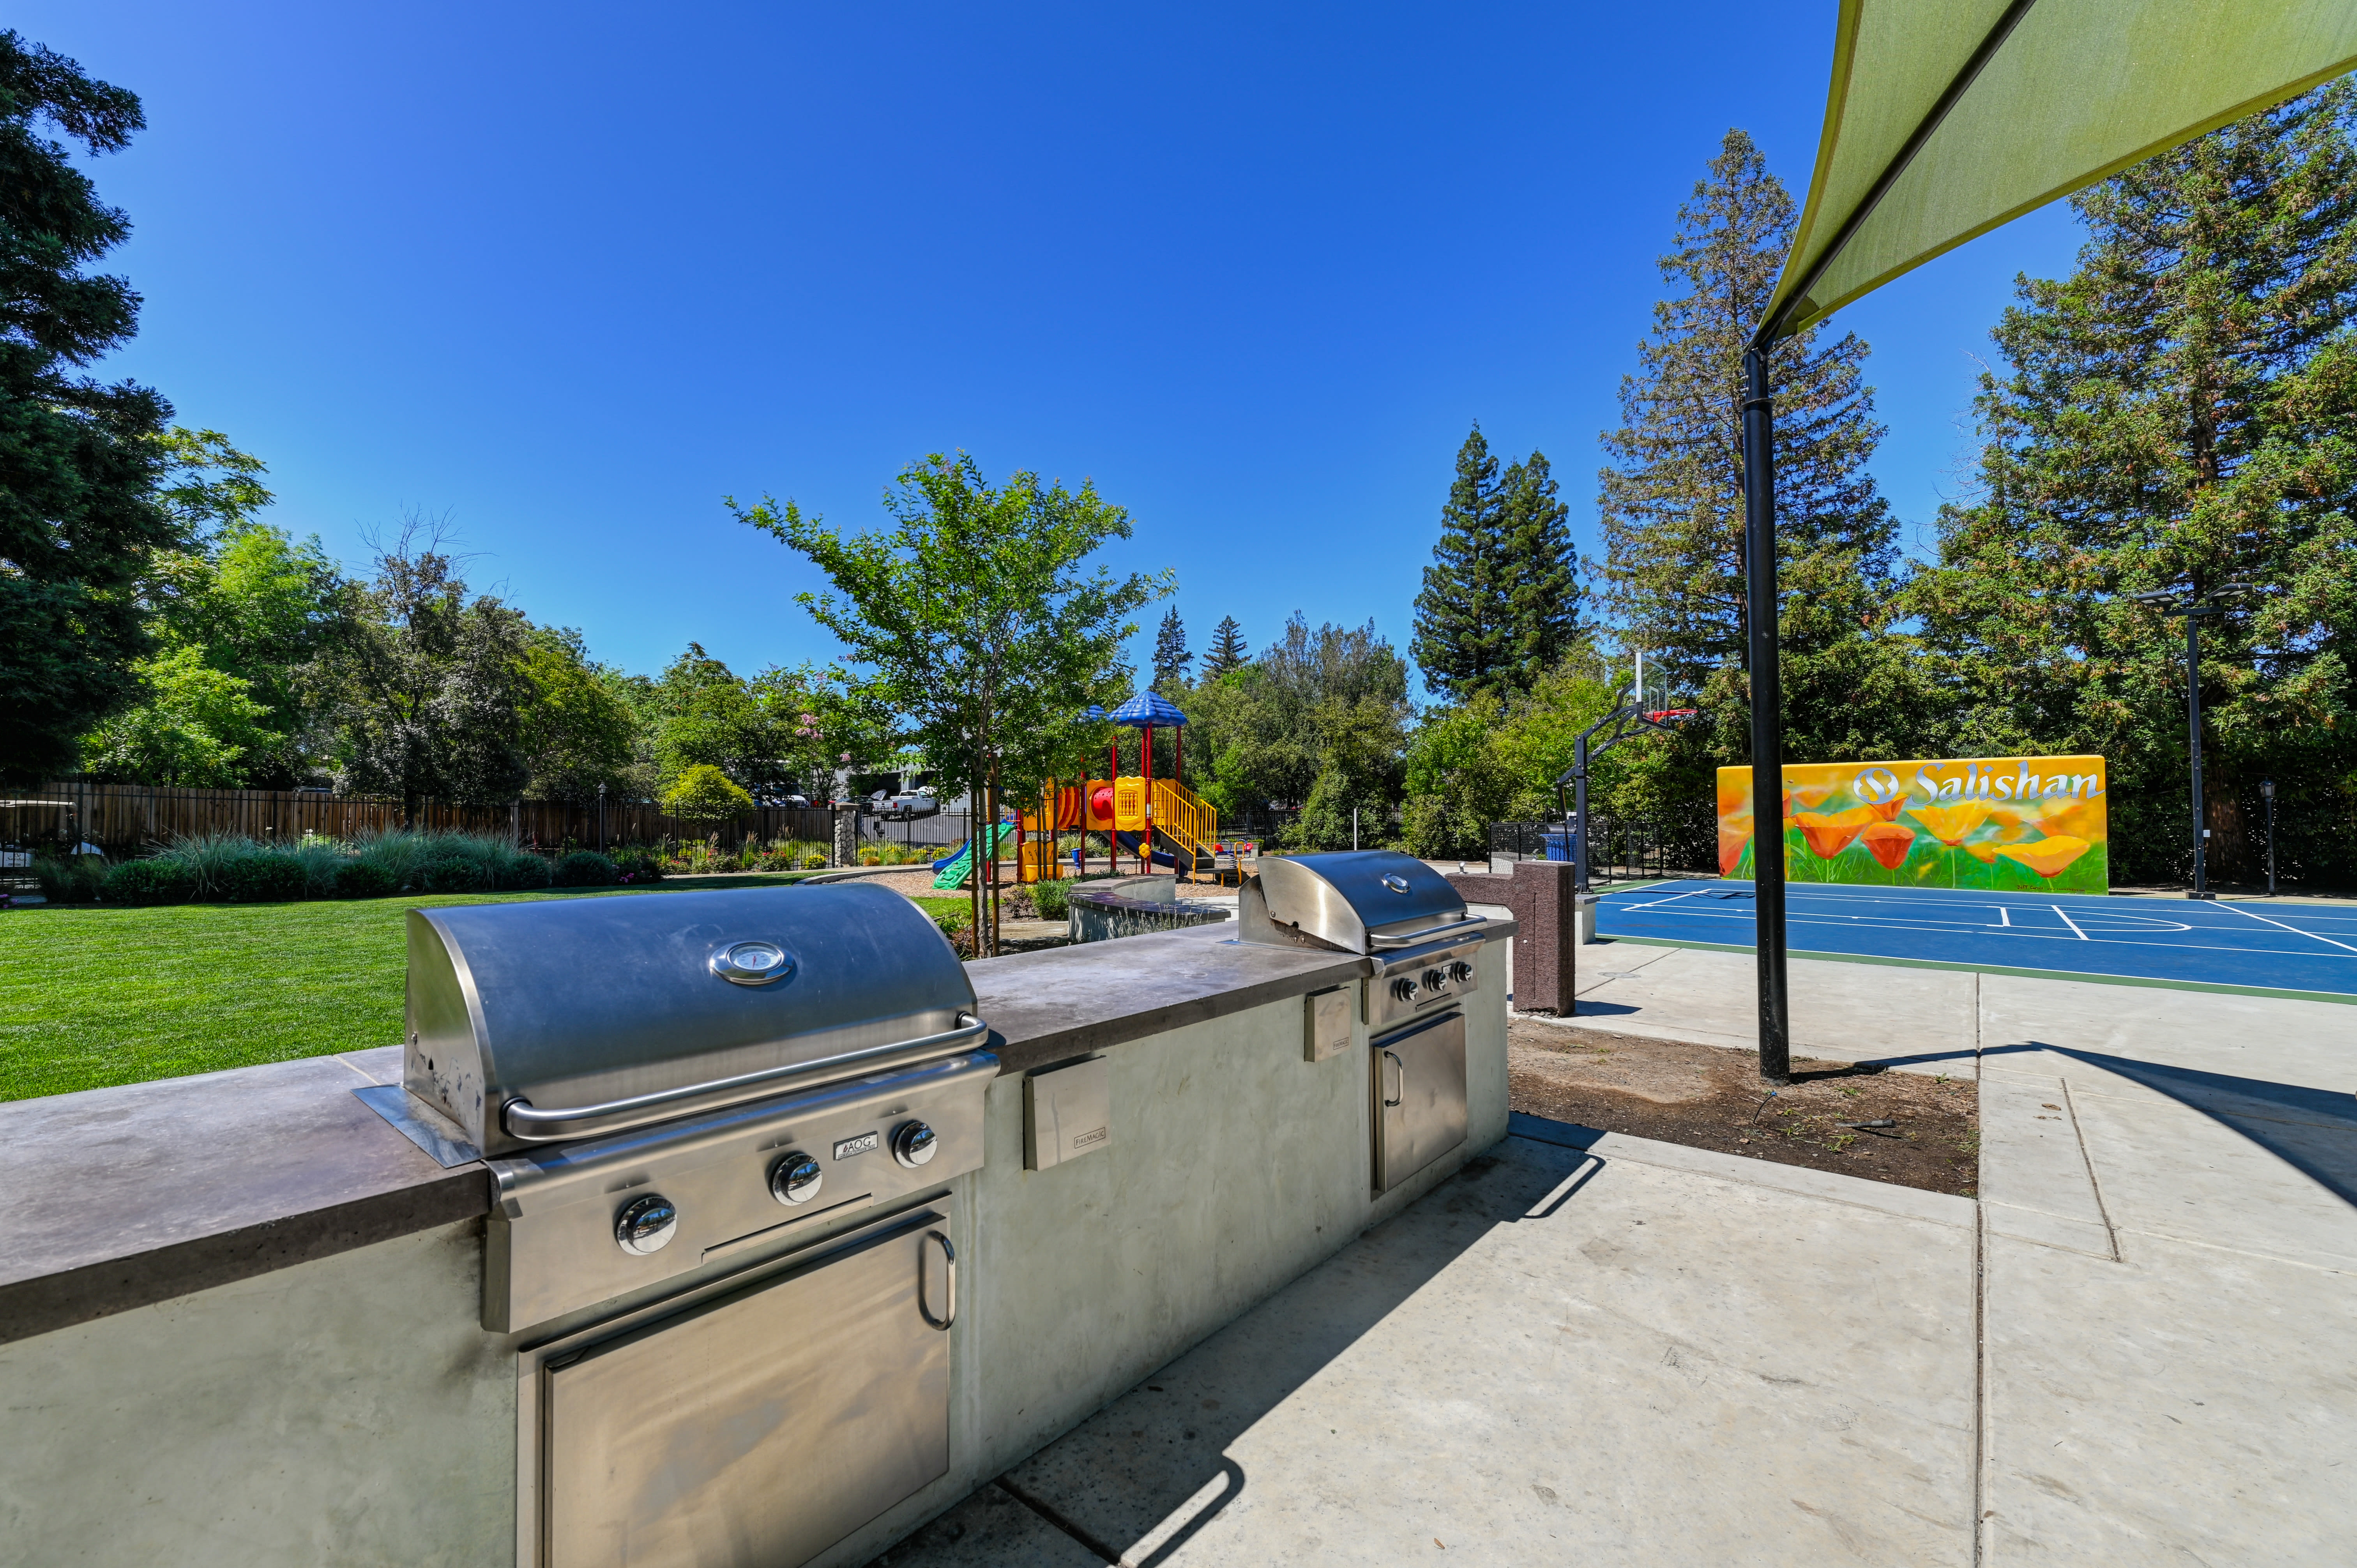 Grilling station at Salishan Apartments in Citrus Heights, California